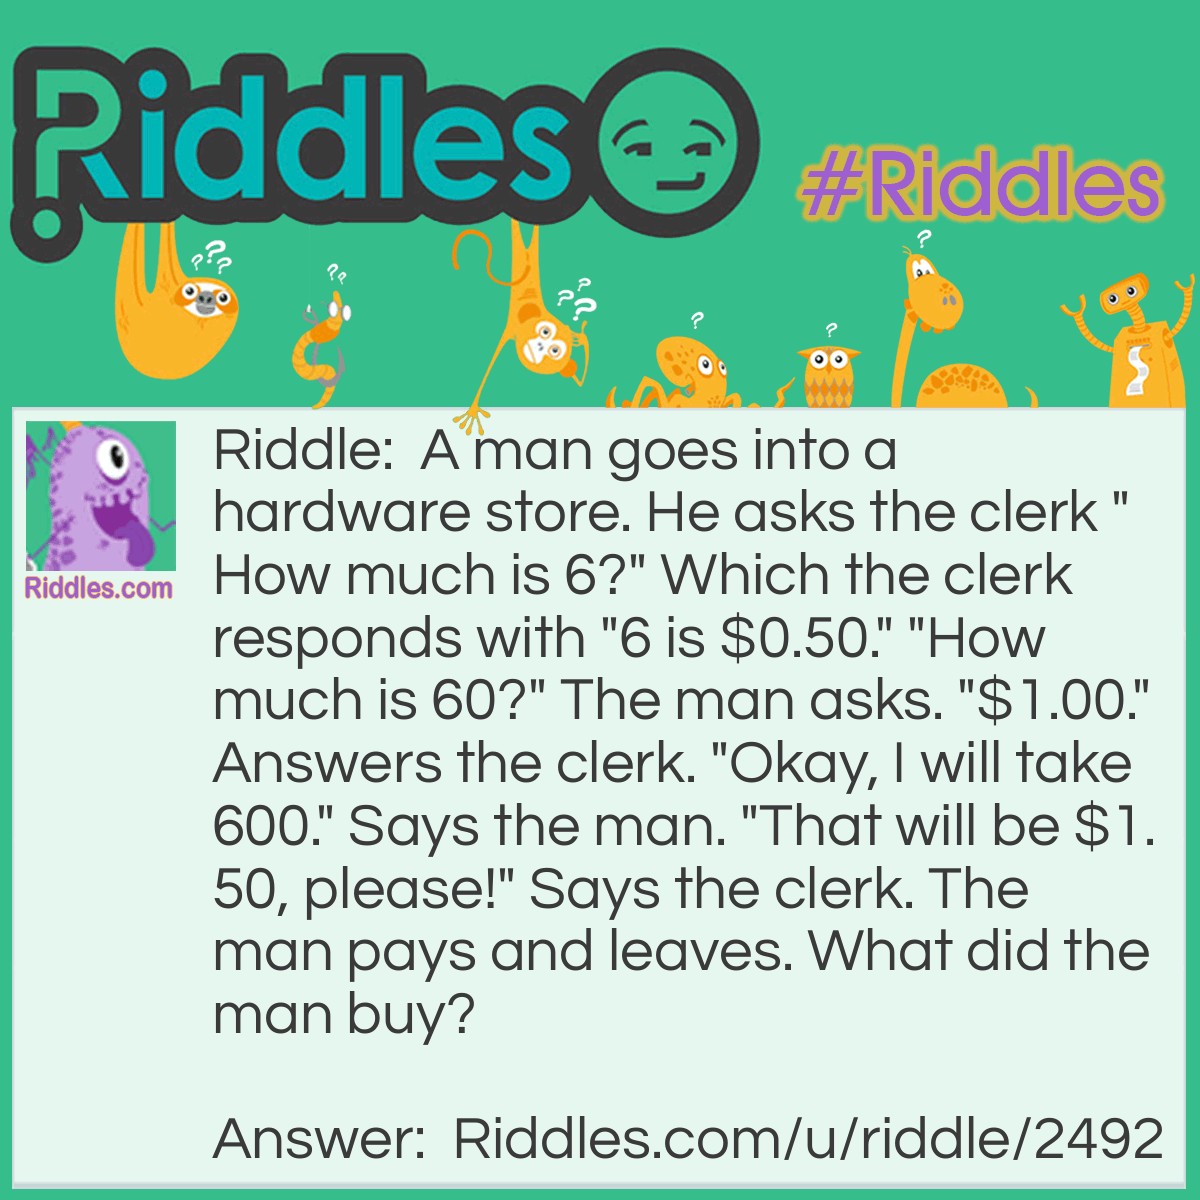 Riddle: A man goes into a hardware store. He asks the clerk "How much is 6?" Which the clerk responds with "6 is $0.50." "How much is 60?" The man asks. "$1.00." Answers the clerk. "Okay, I will take 600." Says the man. "That will be $1.50, please!" Says the clerk. The man pays and leaves. What did the man buy? Answer: He bought house numbers! Each number is $0.50!